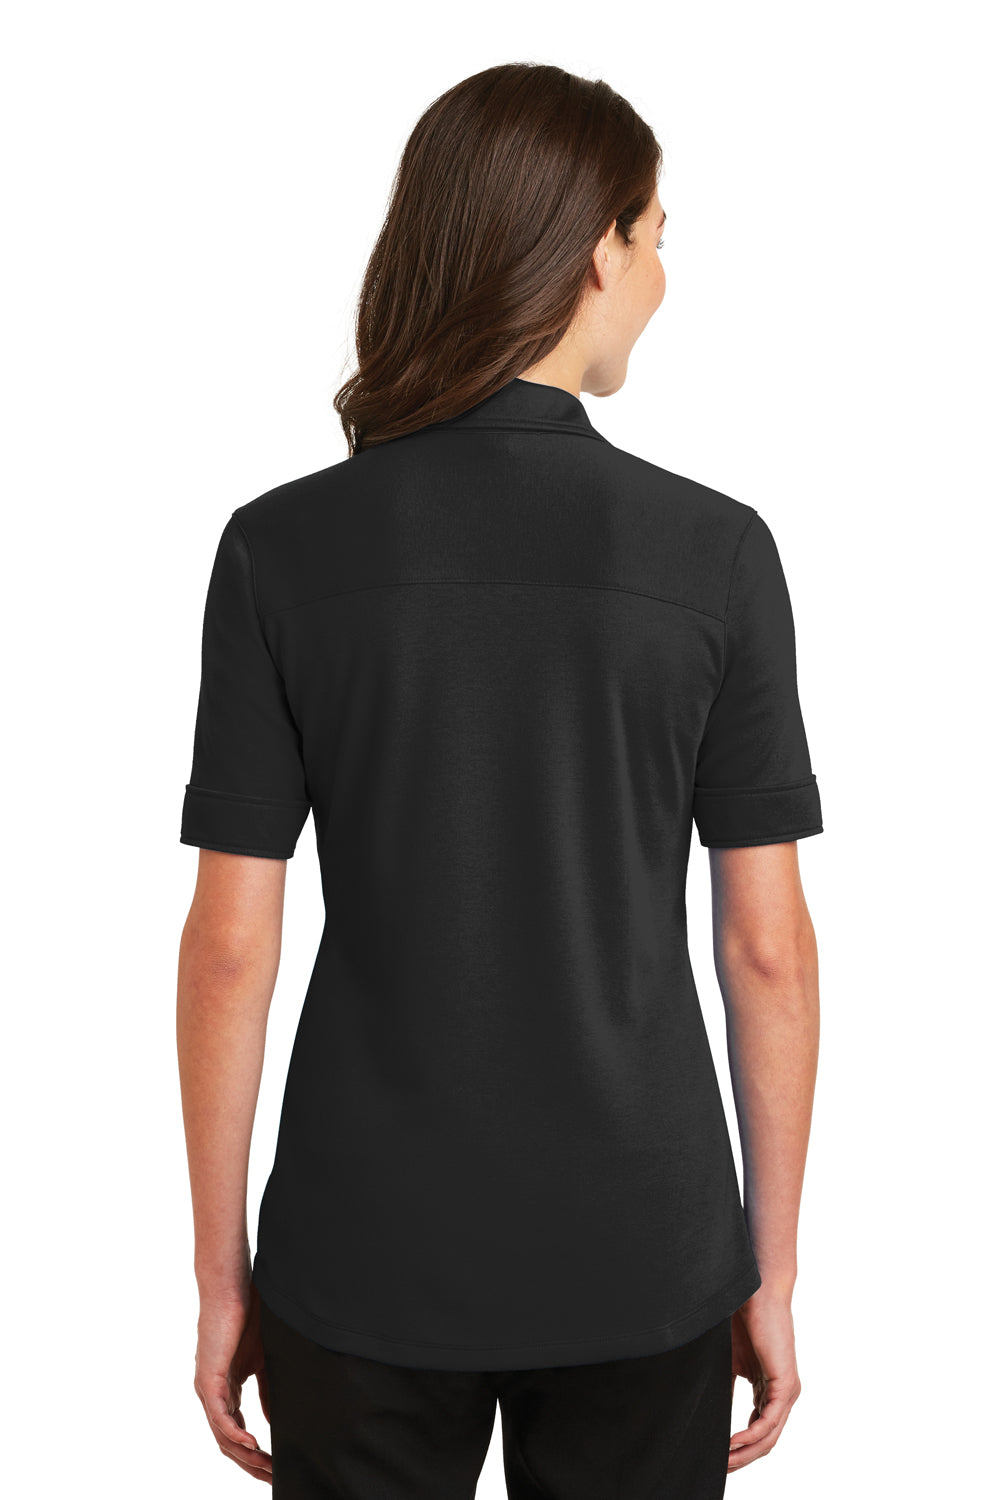 Port Authority L5200 Womens Silk Touch Performance Moisture Wicking Short Sleeve Polo Shirt Black Back